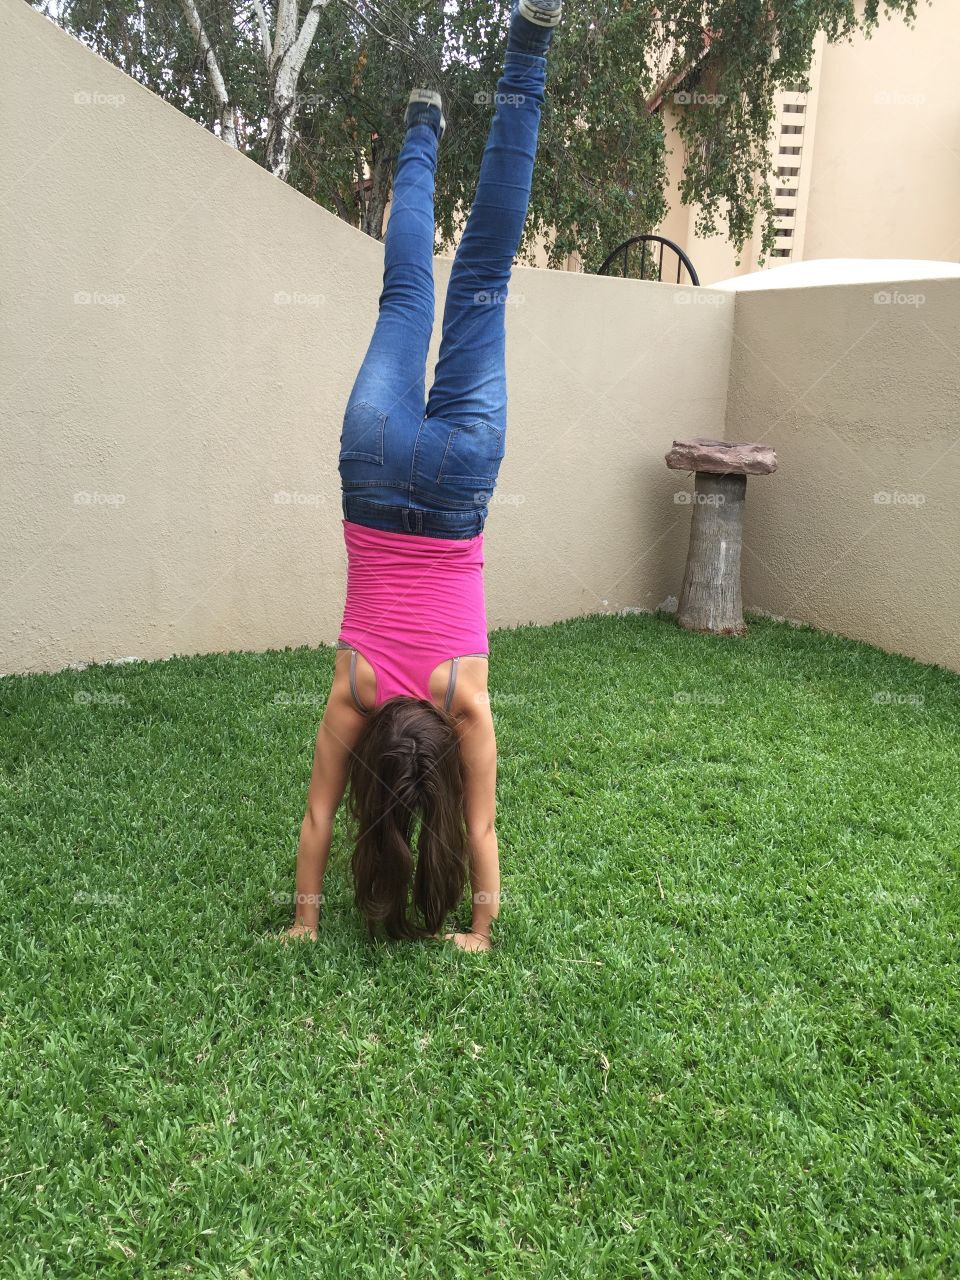 Summer! Throw back your inhibitions and do that handstand. It’s time to enjoy the sunshine 